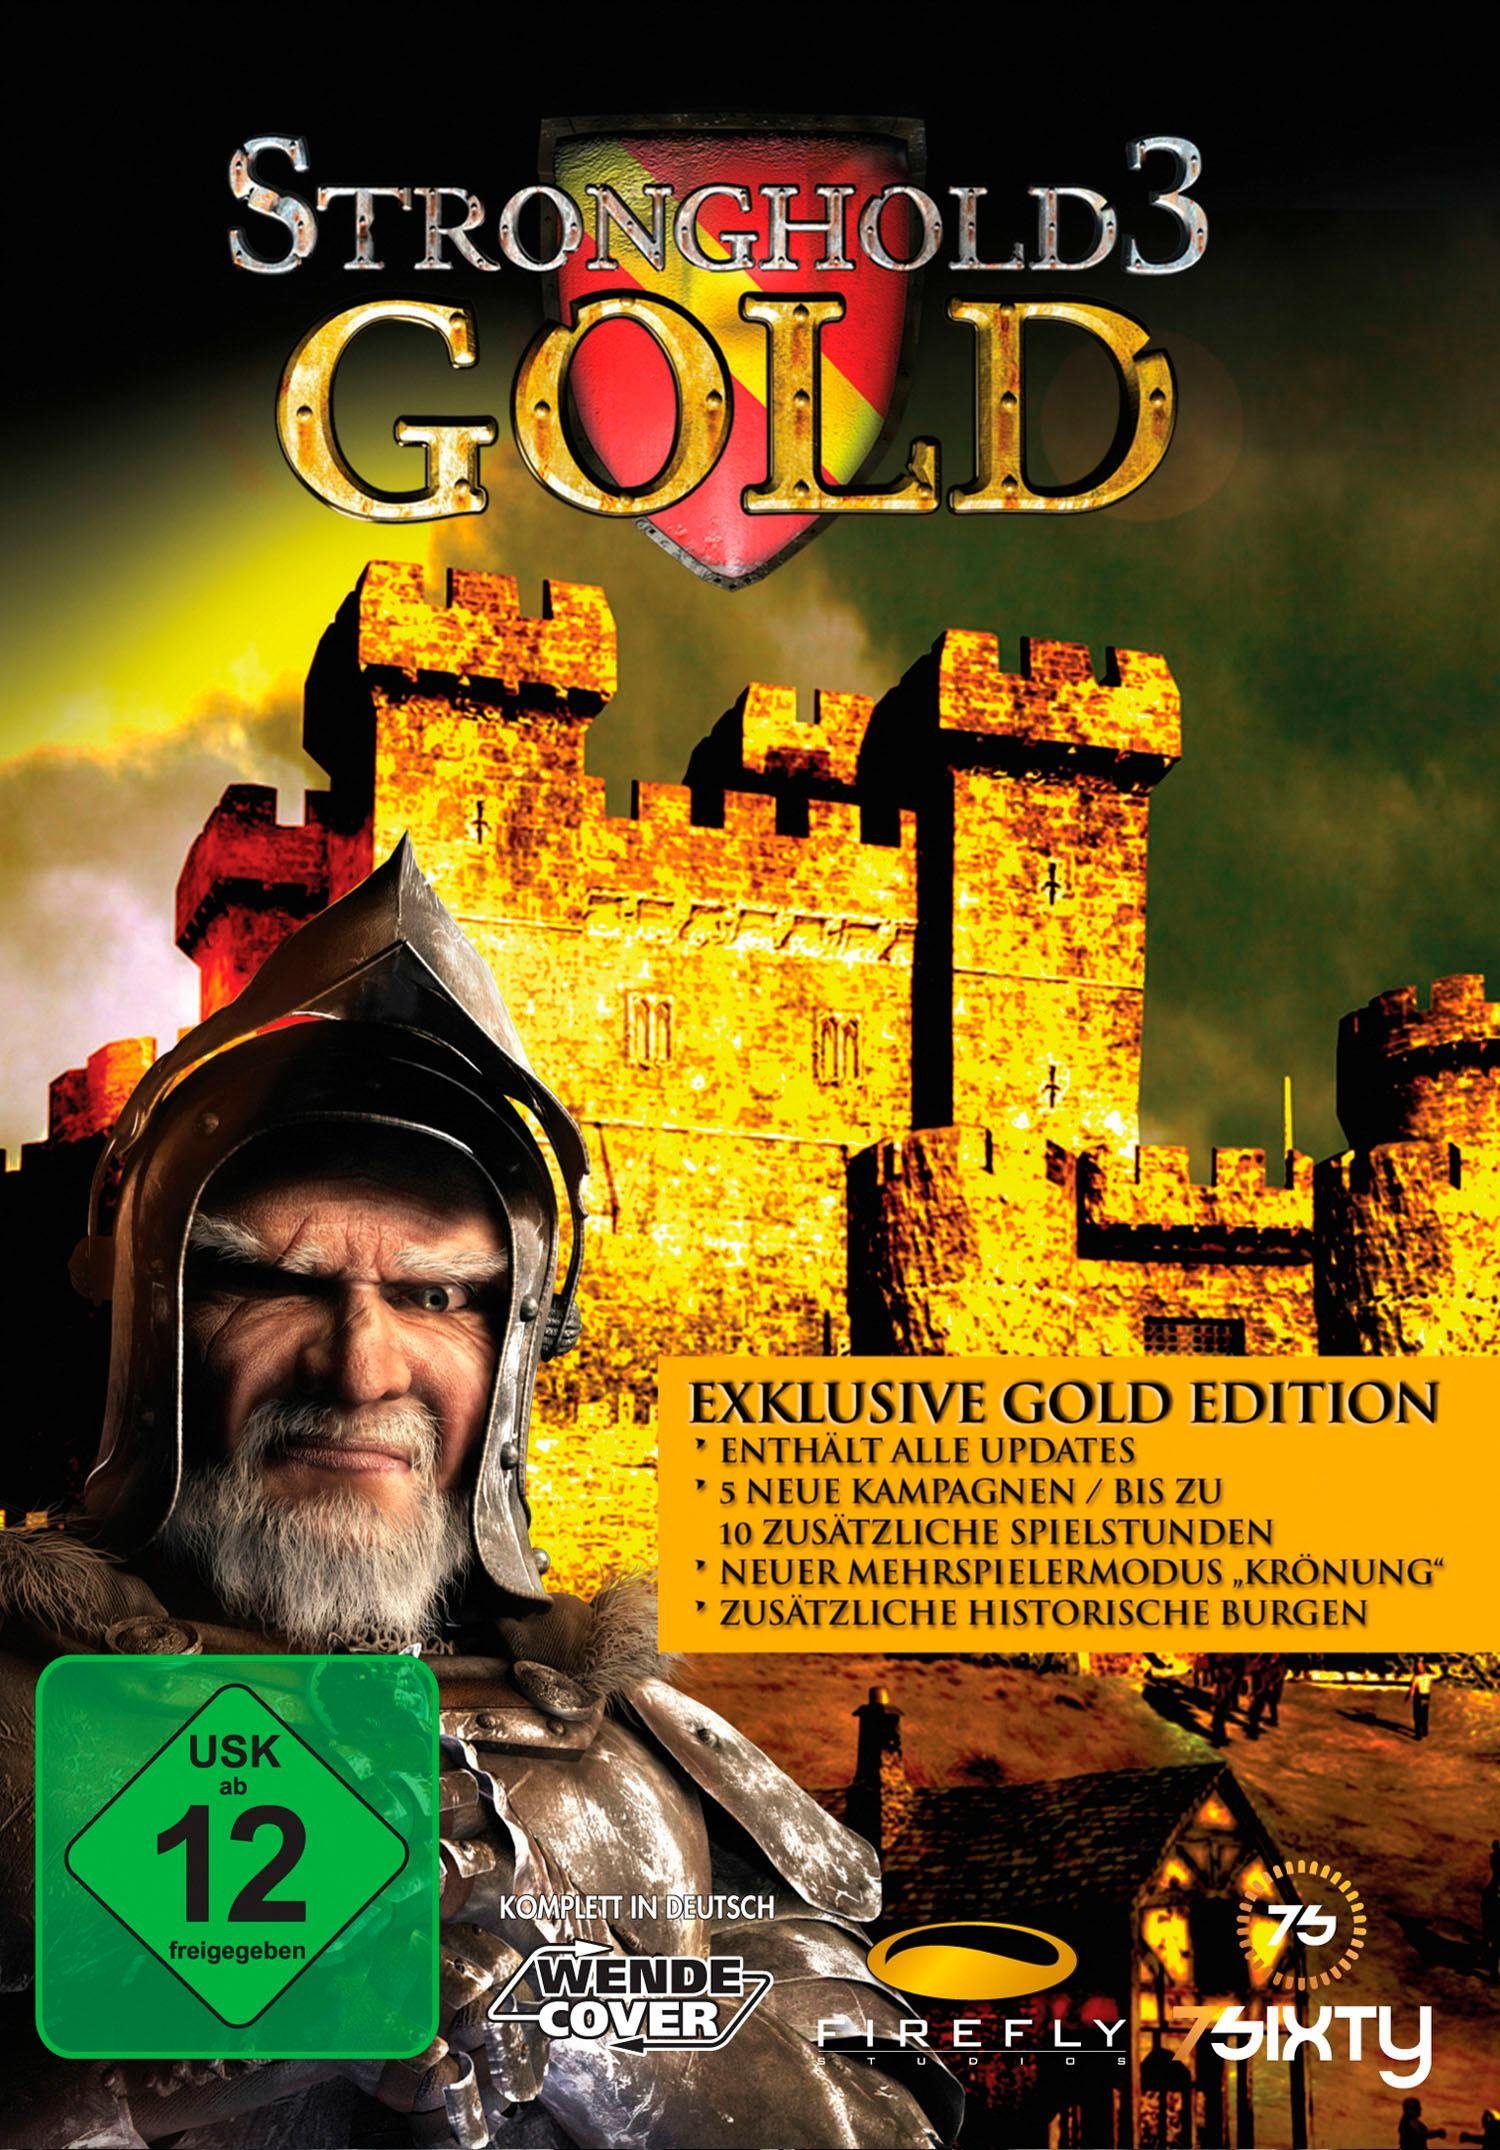 FIREFLY Stronghold PC, Software Pyramide Gold 3 Edition